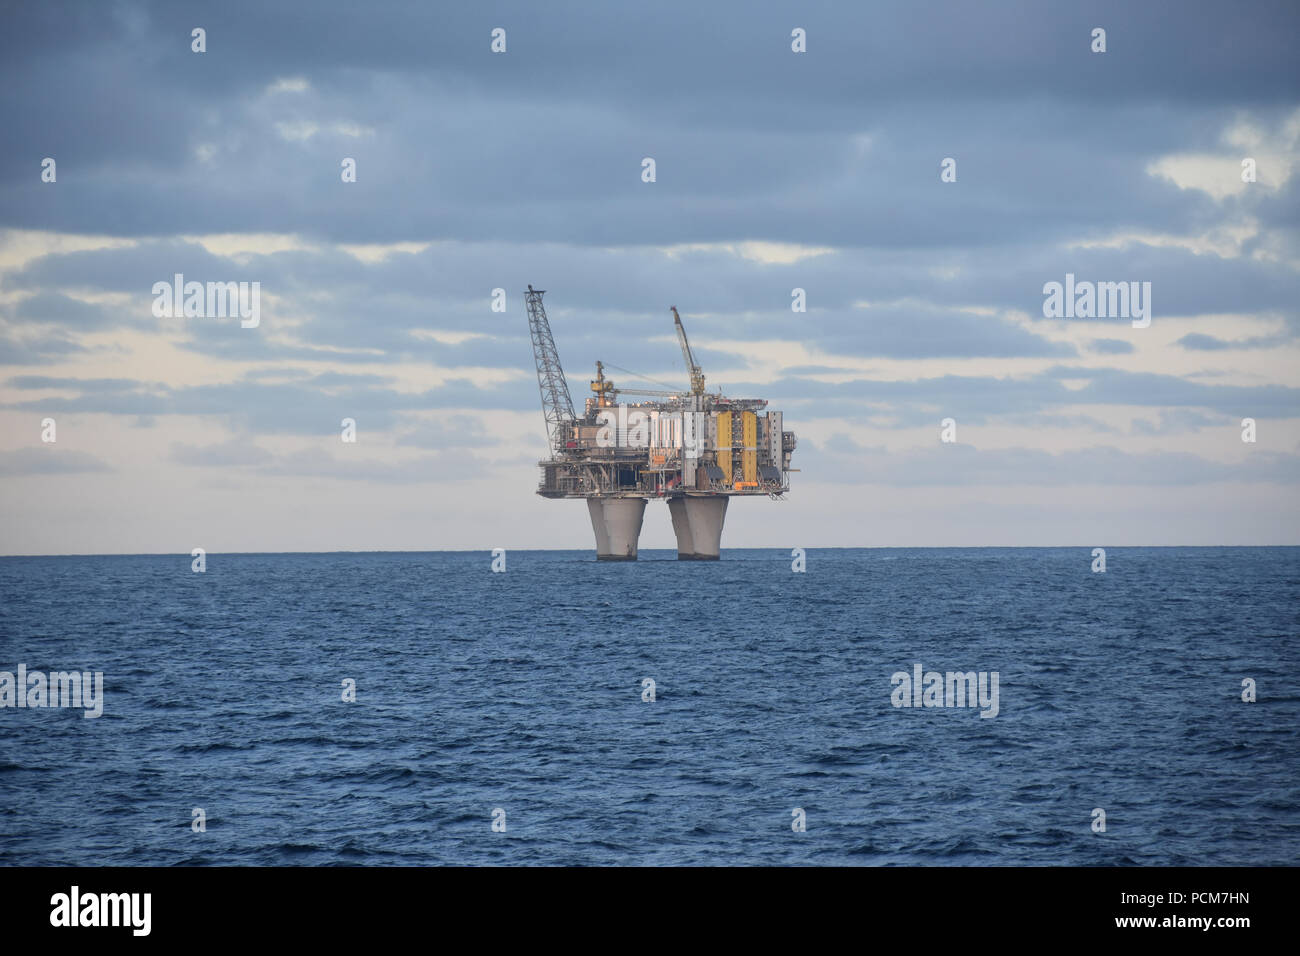 Deep sea oil rig in the North Sea between Norway and Scotland. July, 2018 Stock Photo